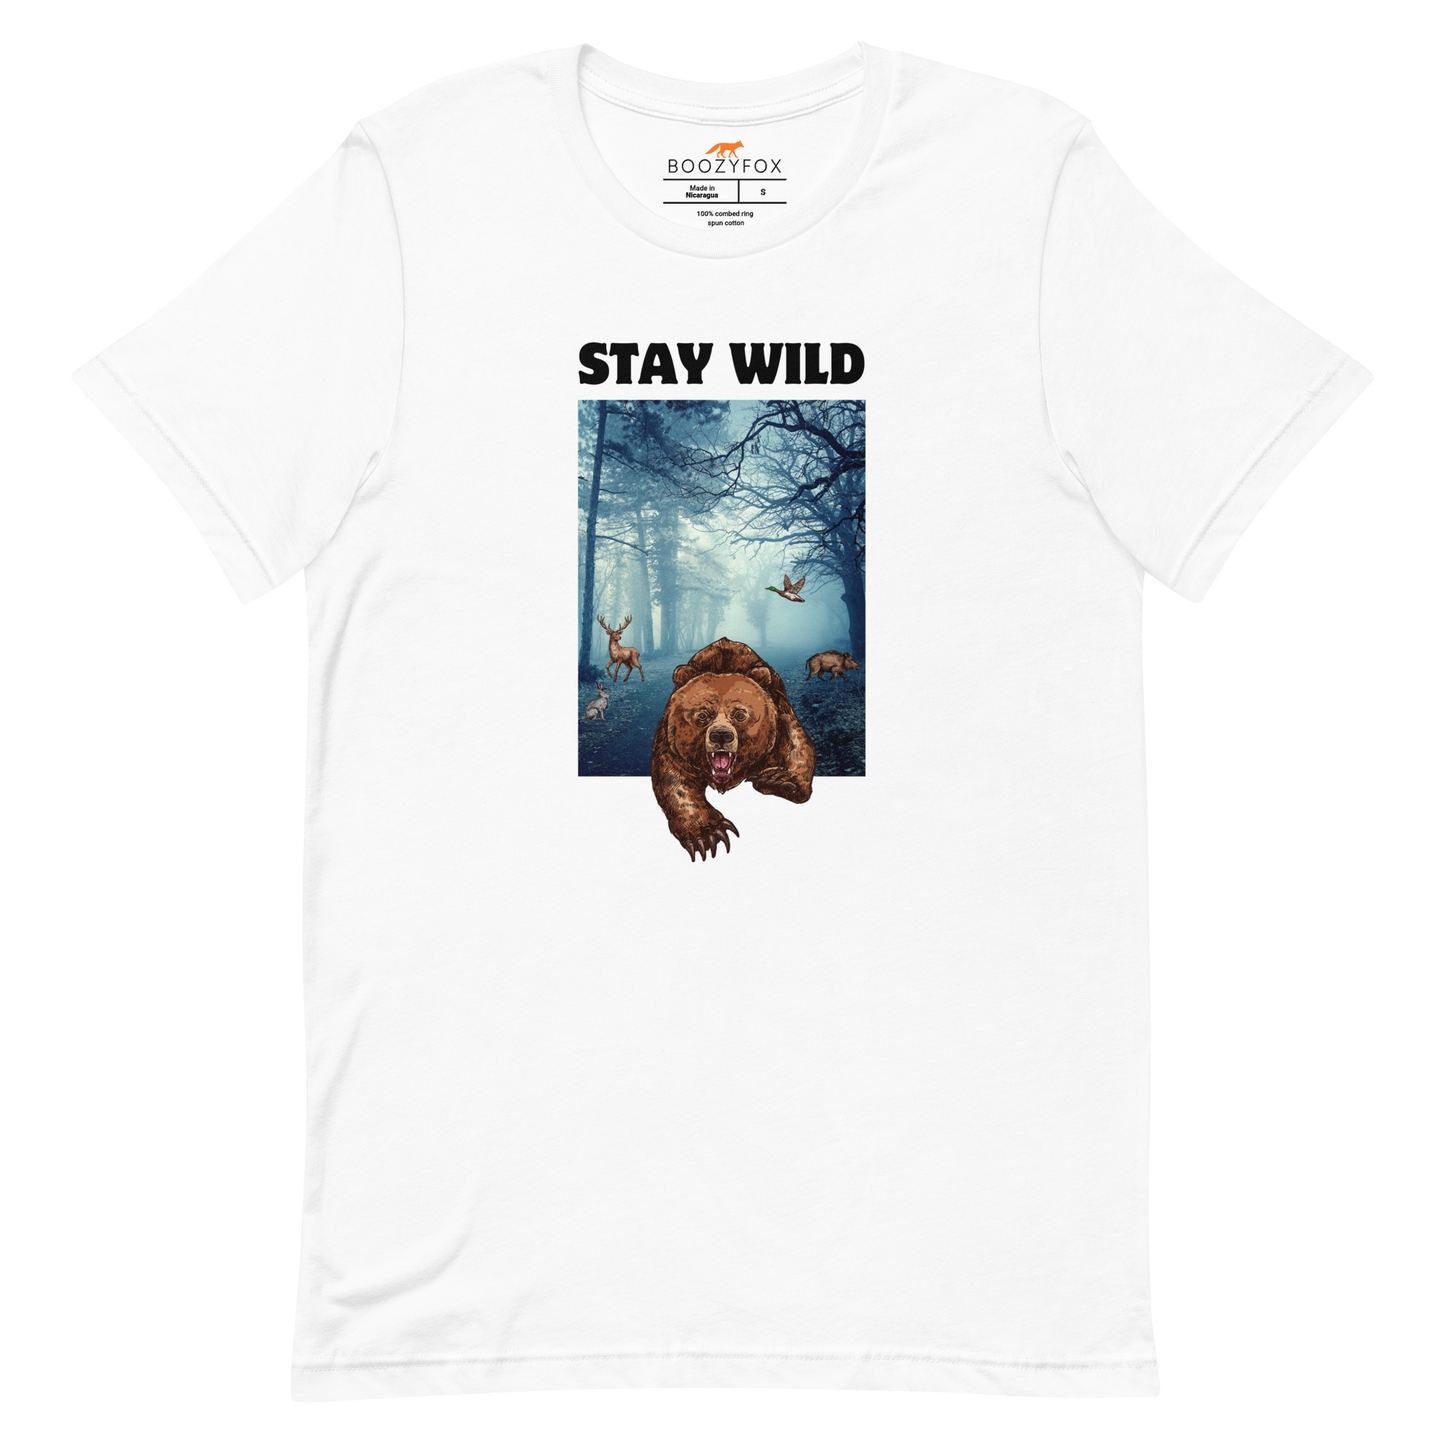 White Premium Bear Tee featuring a Stay Wild graphic on the chest - Cool Graphic Bear Tees - Boozy Fox